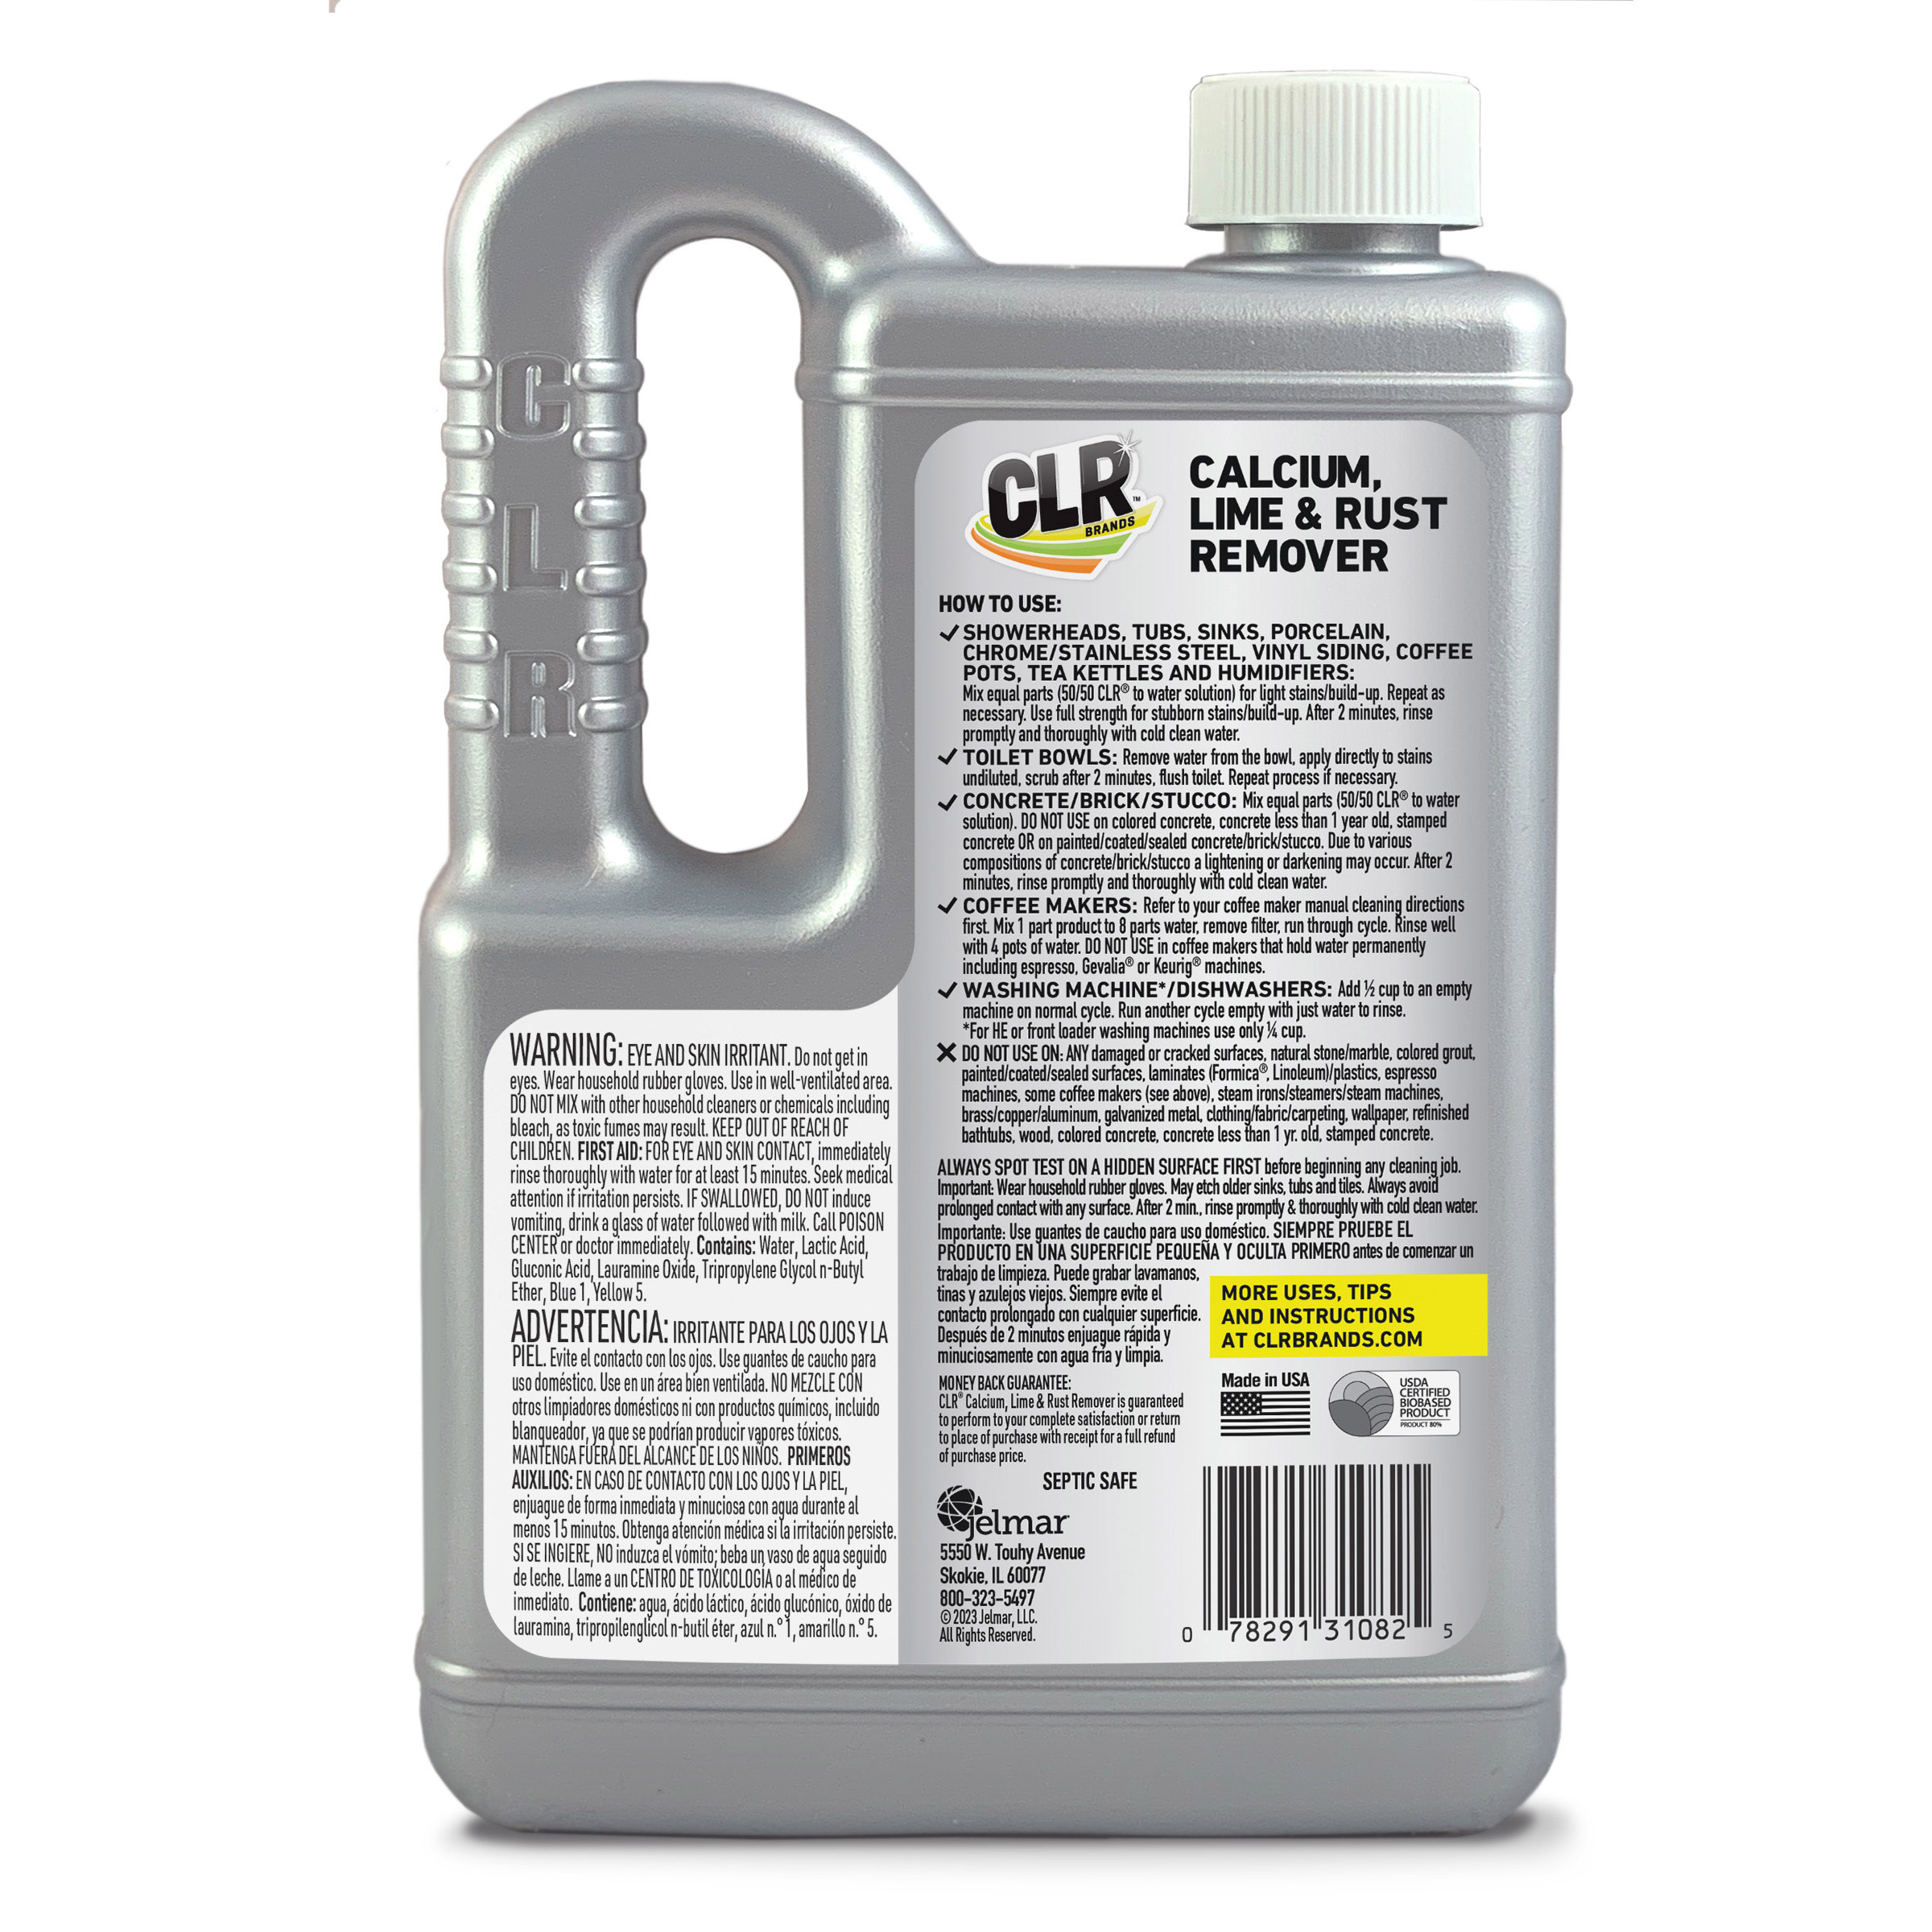 CLR Calcium Lime and Rust Remover, Multi-Use Household Cleaner, EPA Safer Choice, 28 oz - image 2 of 7